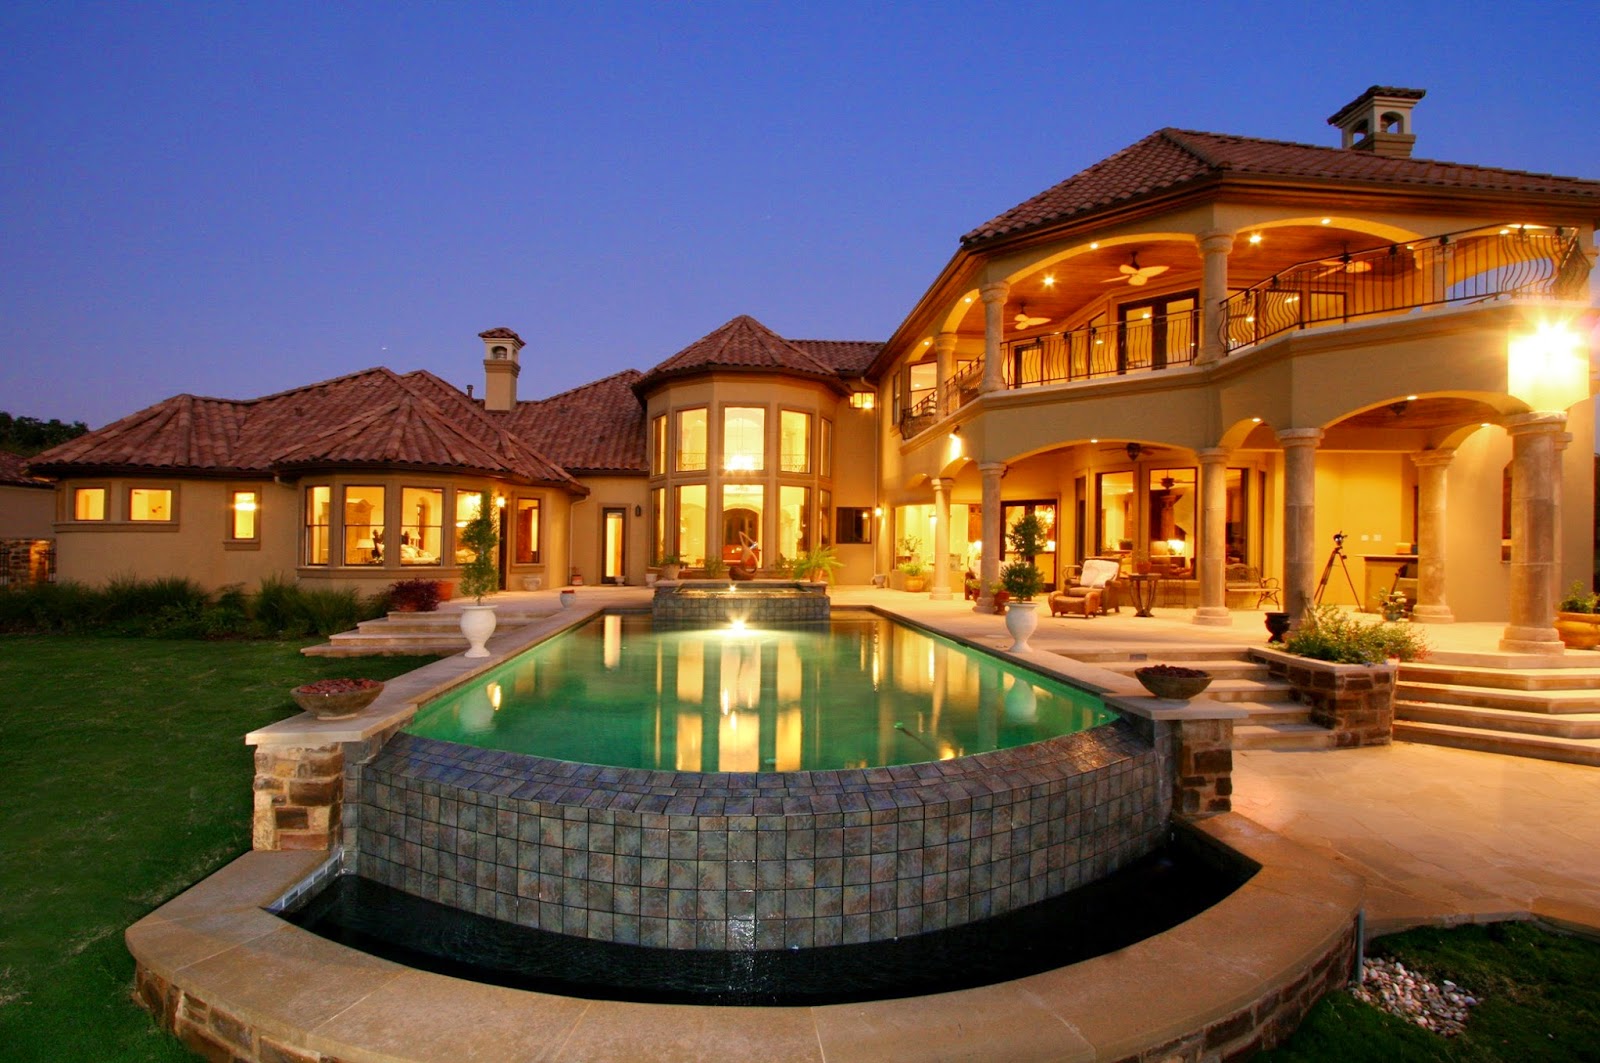 Mediterranean House Plans with Pools - Home Designs